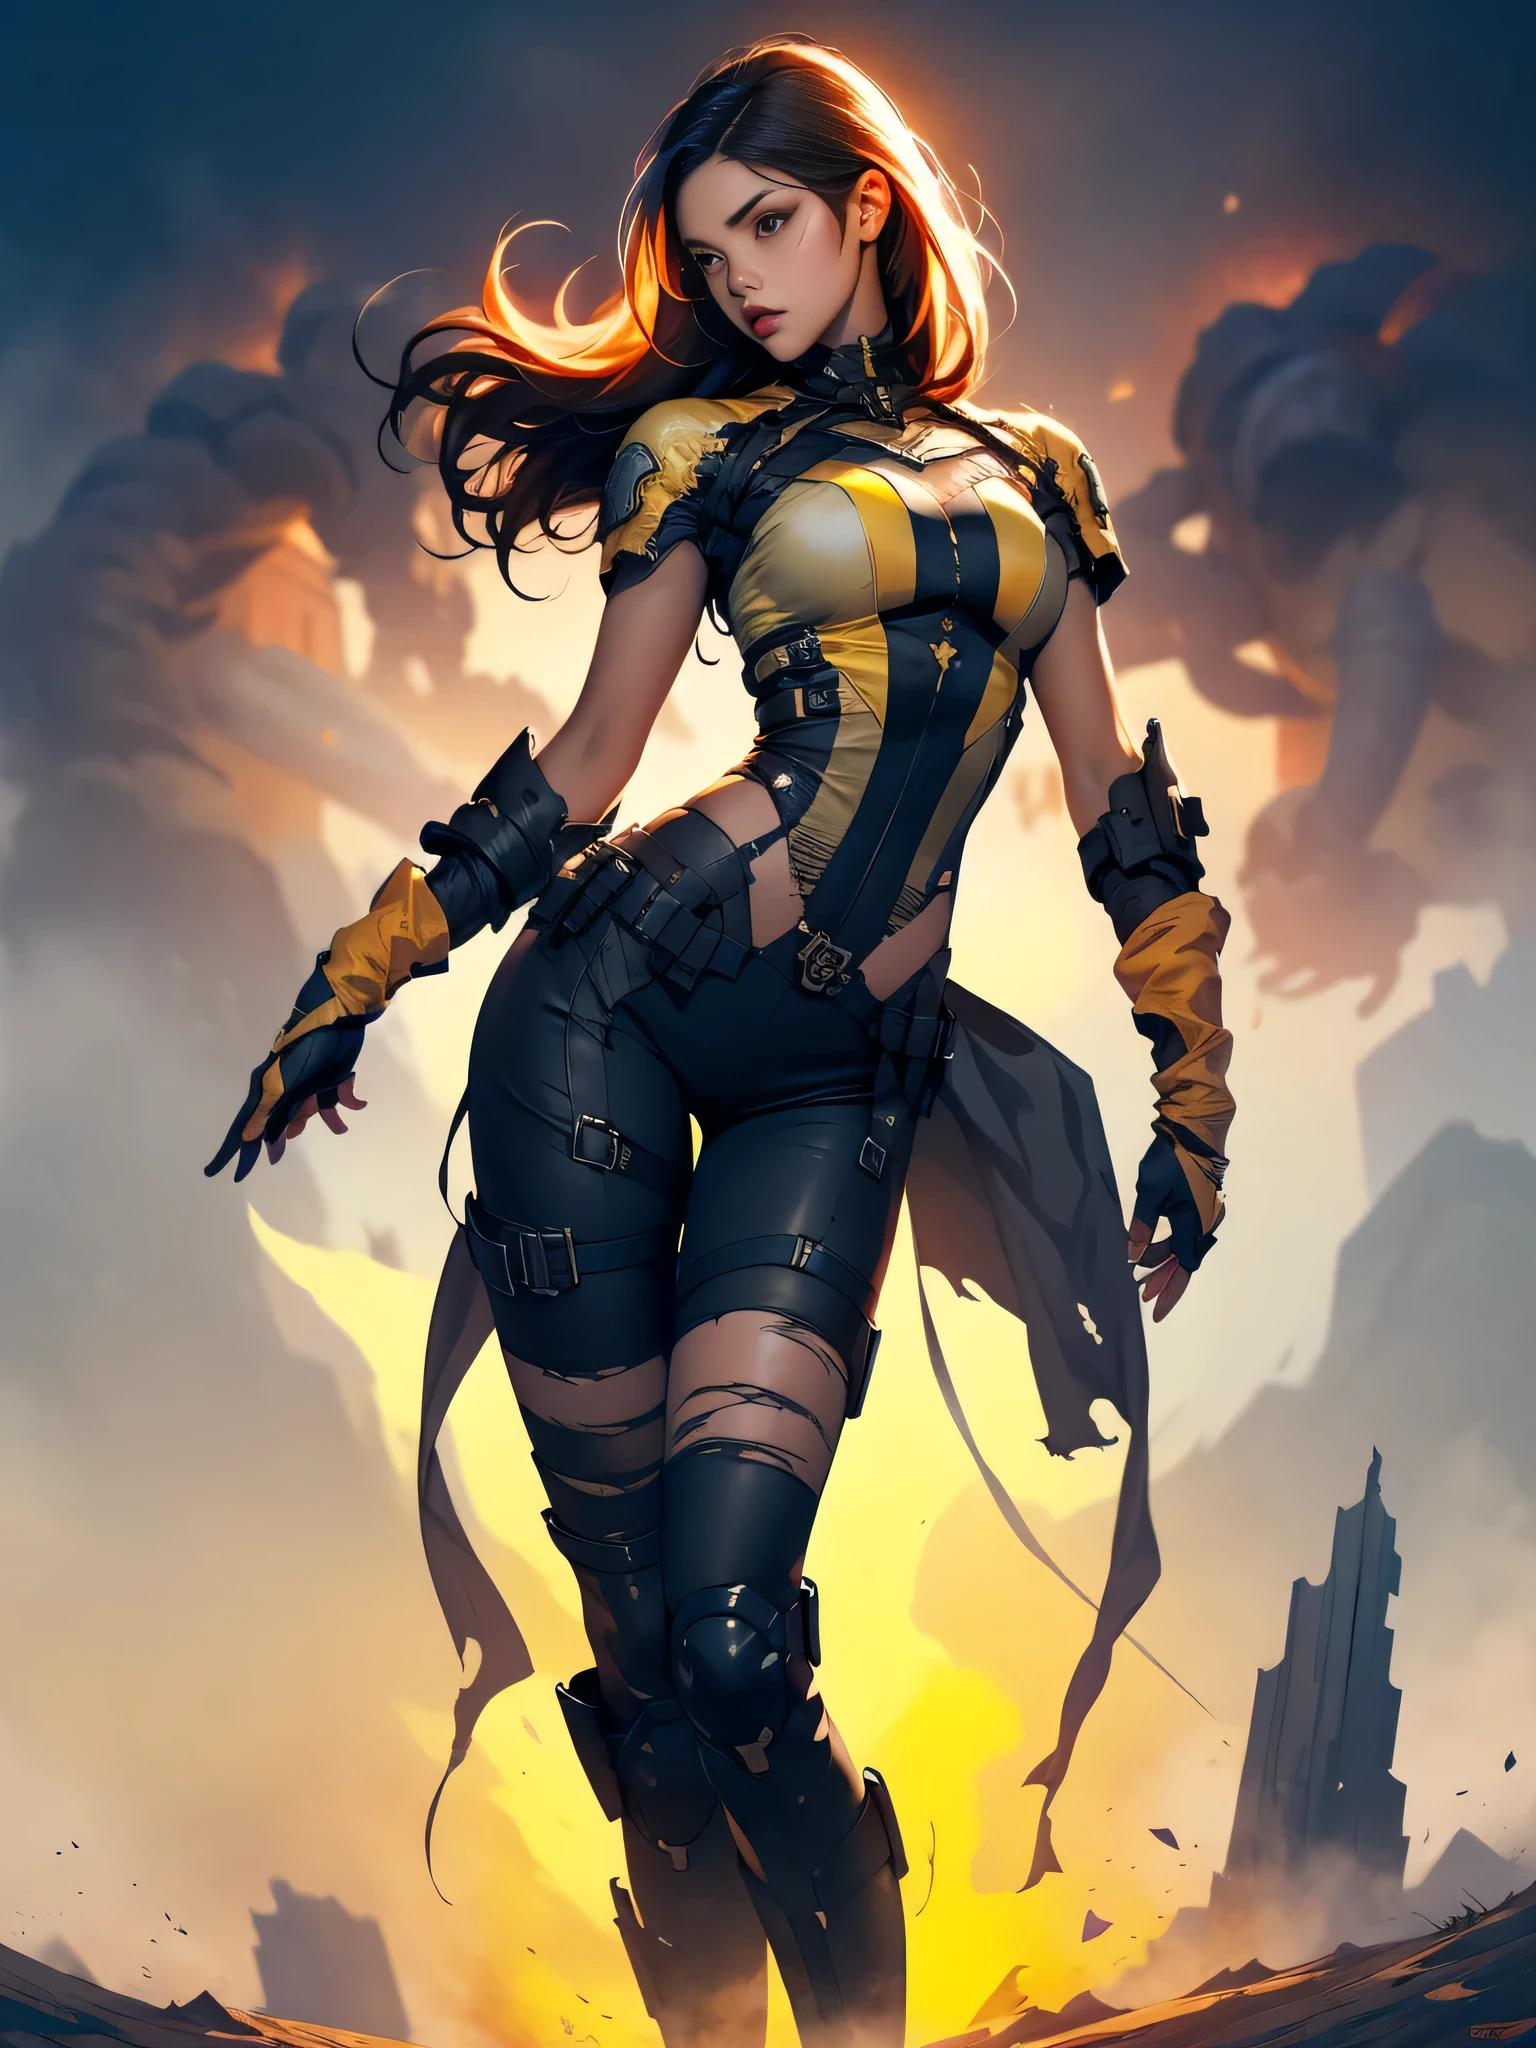 dark and torn, 1 young beautiful muscular body, fierce expression, holding a gun, (colors on her clothes, warm, orange, yellow, violet:1.3), standing on a desolate wasteland, dramatic lighting, intense shadows, sandy texture, tall contrast, vibrant colors, dynamic pose, powerful stance, rugged background, explosive atmosphere, dystopian theme, surreal elements, digitally painted illustration, HD resolution, intricate details, dramatic composition, avant-garde and chaotic brush strokes, gothic style, intense emotions, epic scale, raw and gritty feel, captivating and provocative artwork.